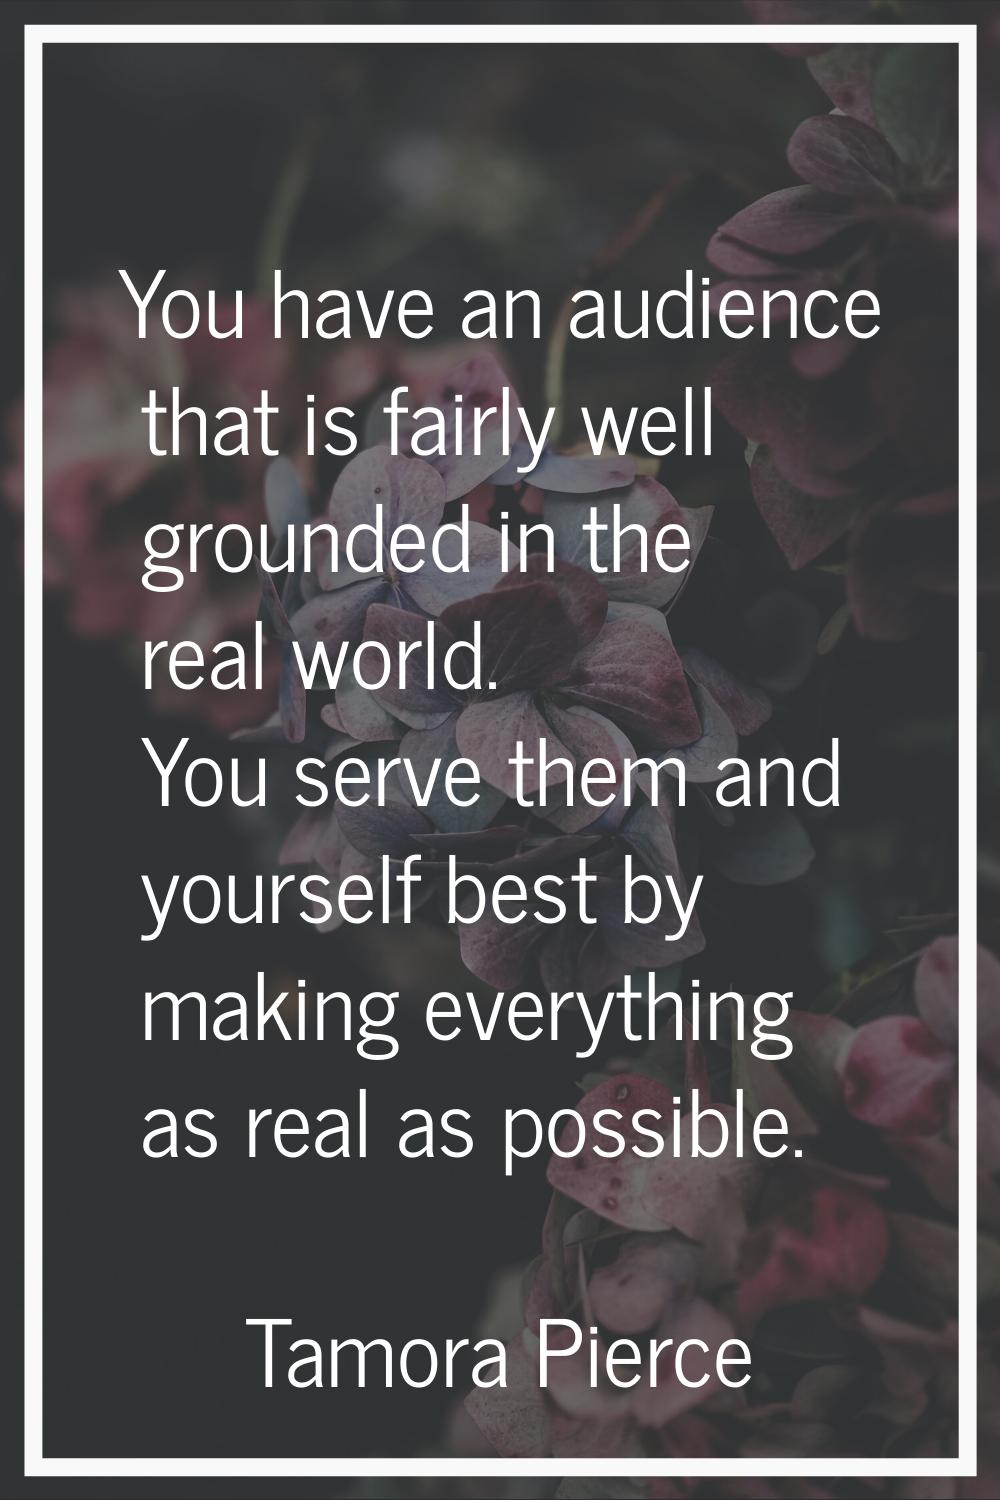 You have an audience that is fairly well grounded in the real world. You serve them and yourself be